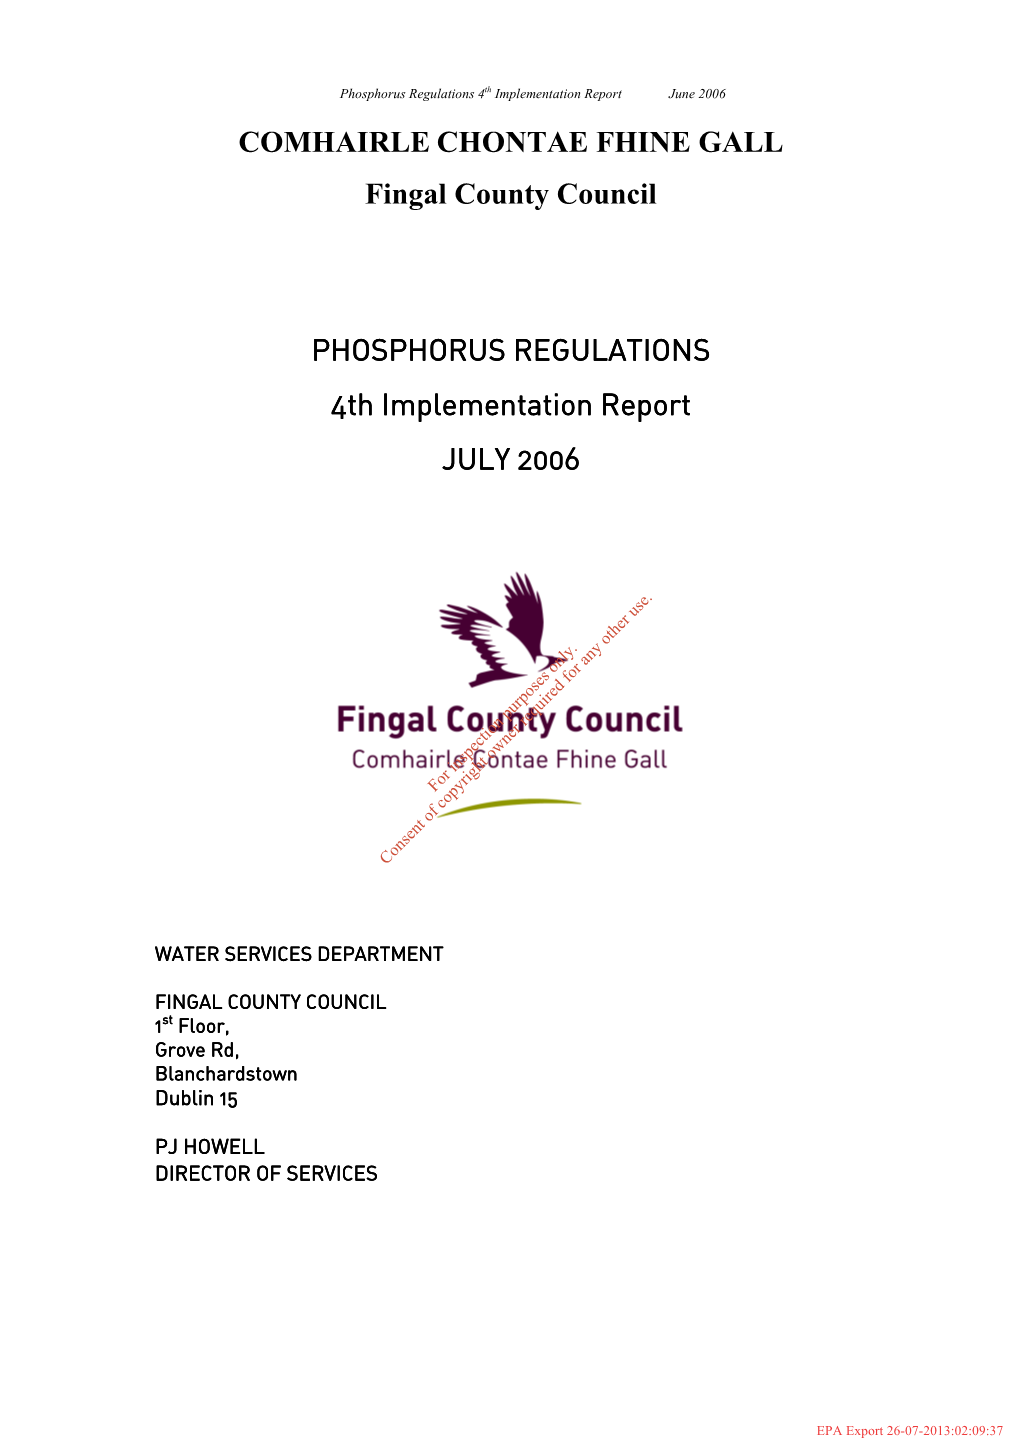 COMHAIRLE CHONTAE FHINE GALL Fingal County Council PHOSPHORUS REGULATIO PHOSPHORUS REGULATIONS 4Th Implementation Report 4Th